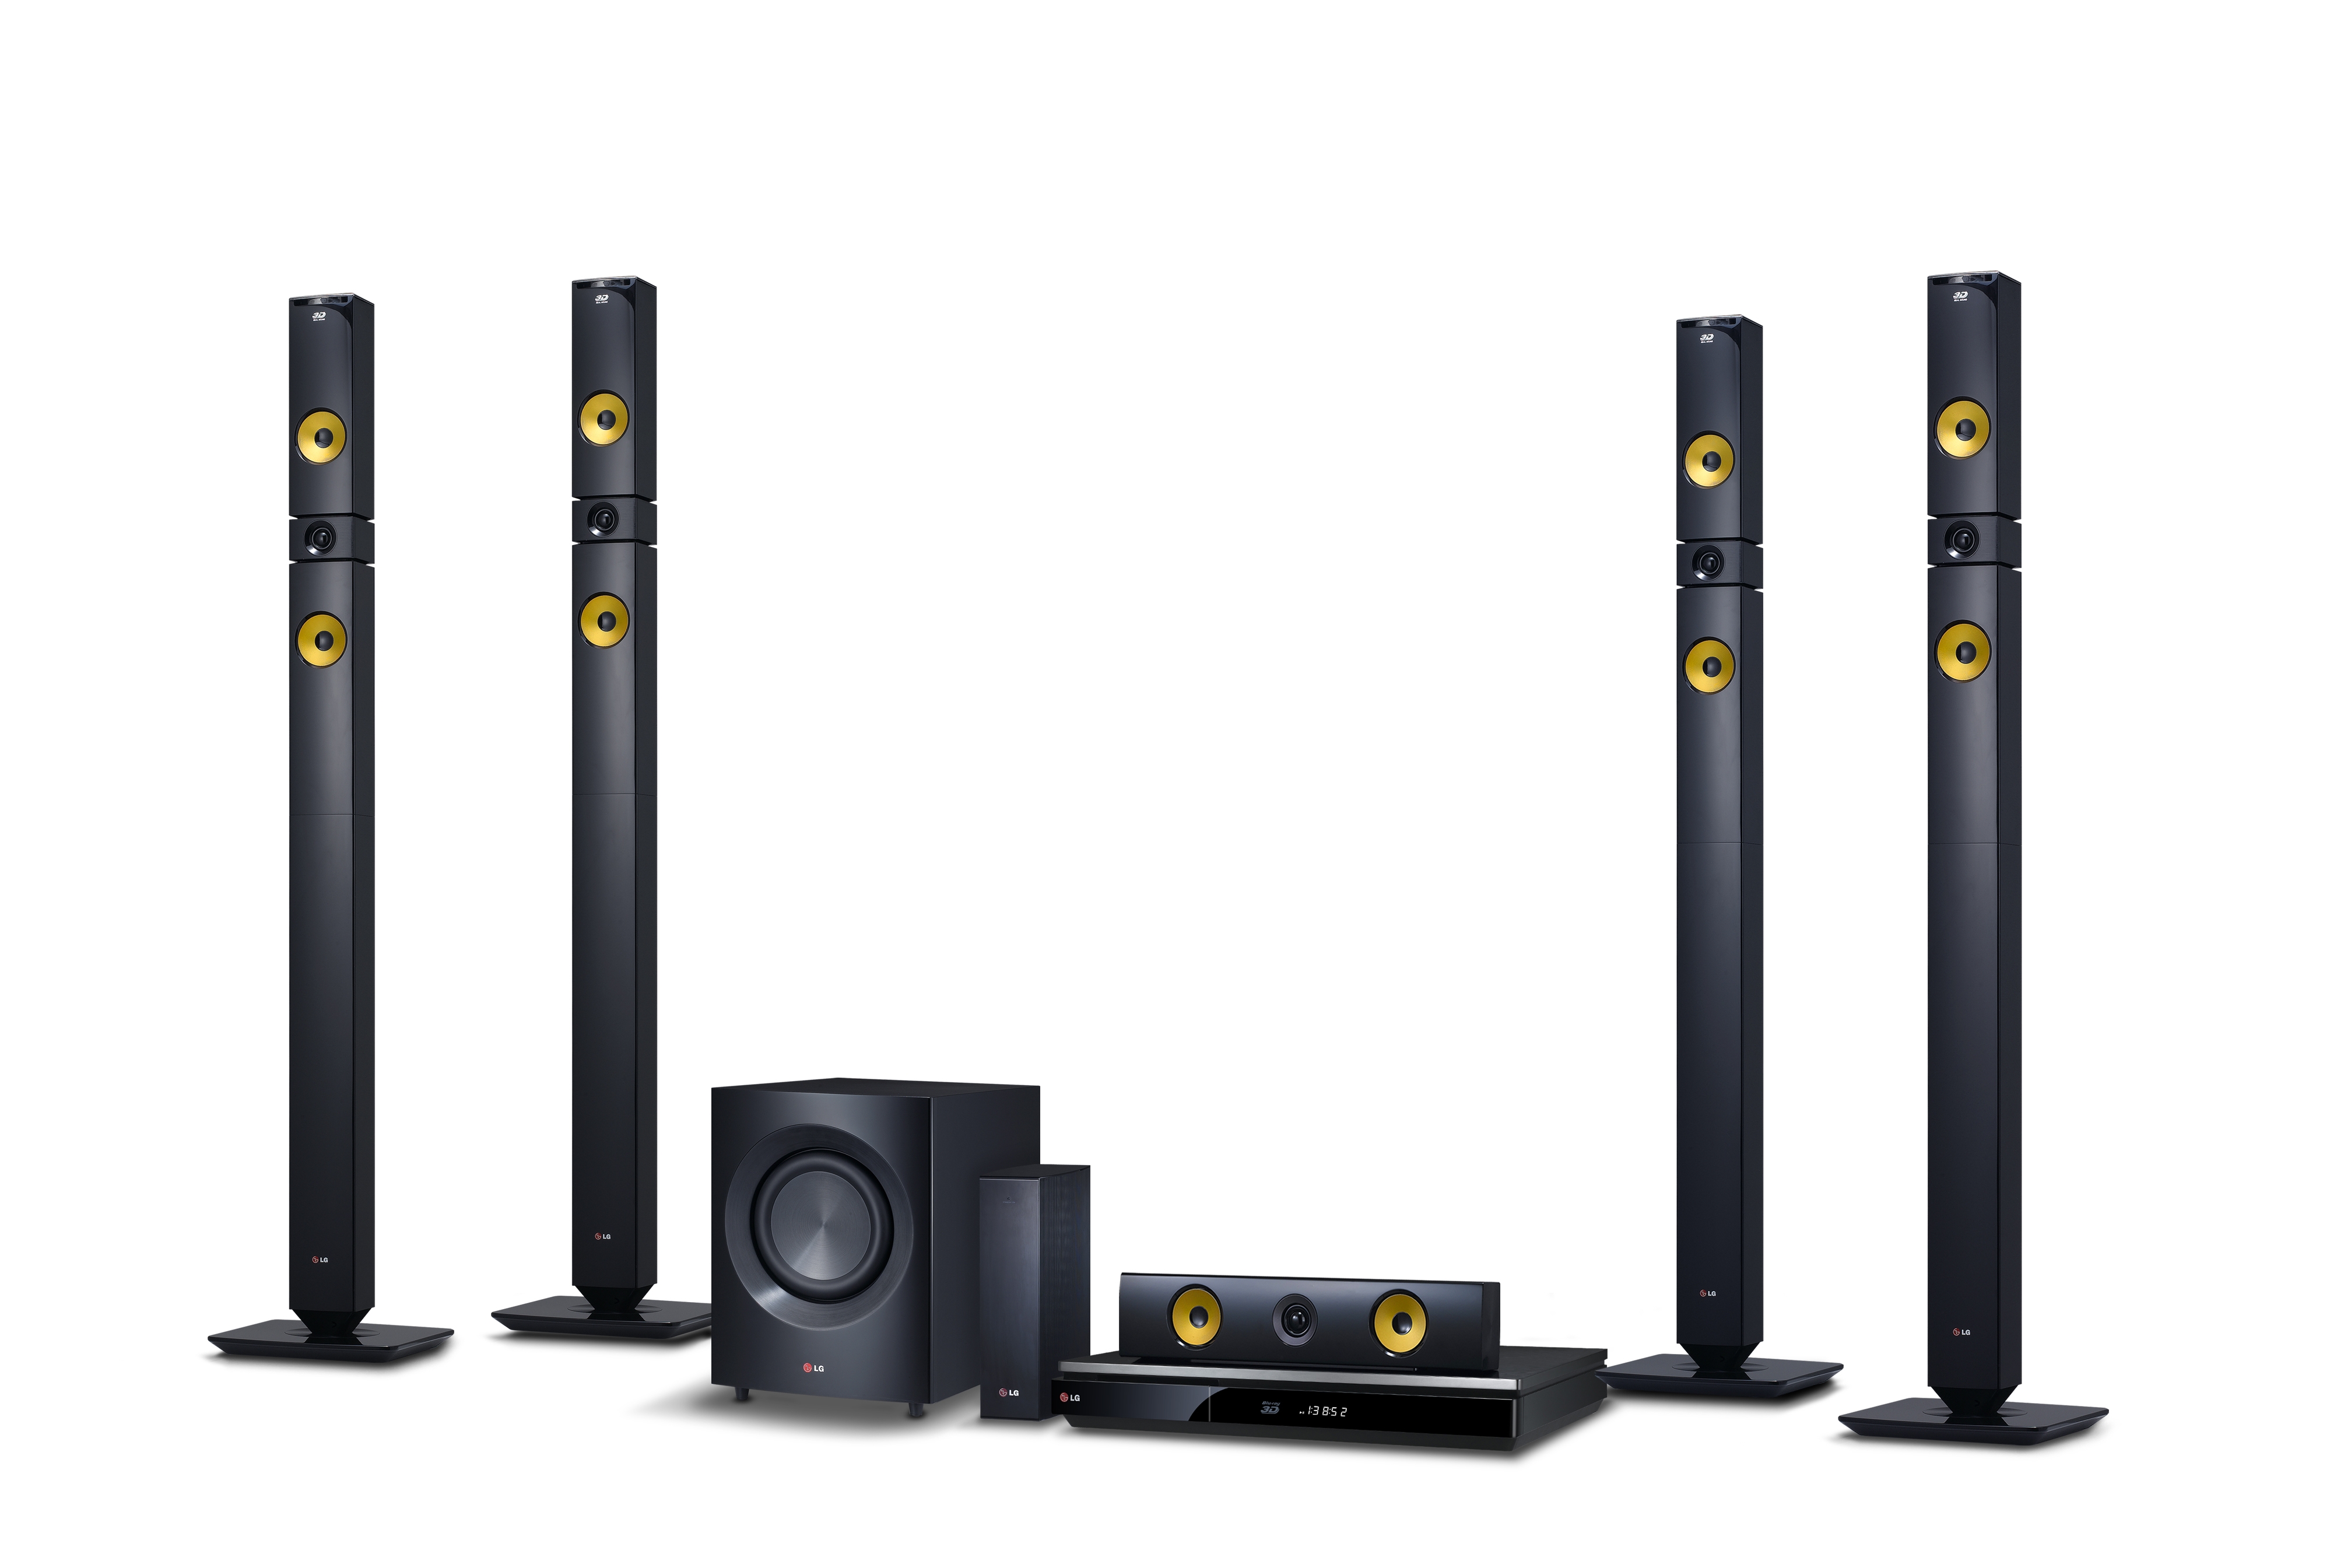 A right-side view of LG 2013 audio and video lineup including BH9430PW 9.1-channel speaker system, NB4530A Sound Bar, BP730 Blu-ray player with Smart TV features, the ND8630 Dual Docking Speaker and the NP6630 Portable Speaker.